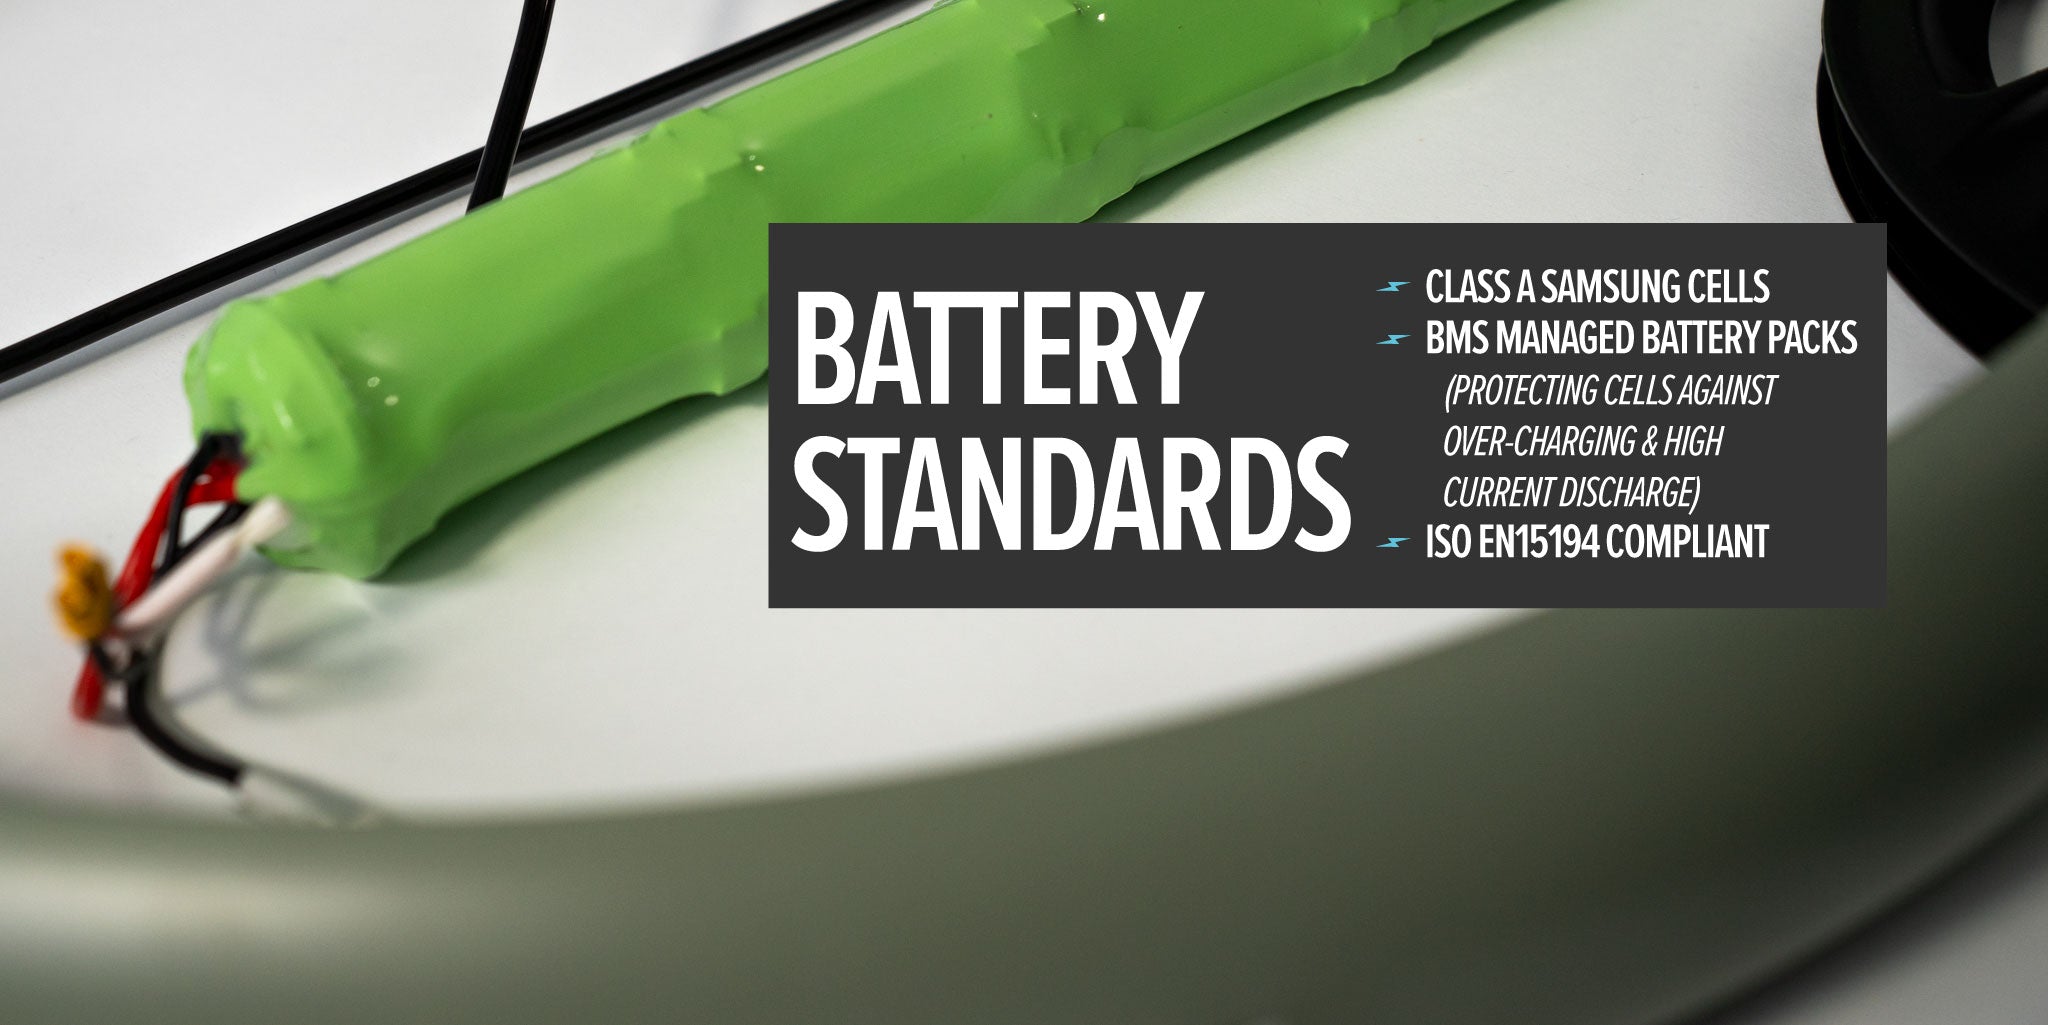 Estarli take pride in battery standards. Our battery packs are ISO EN15194 compliant and contain Class A Samsung cells within a BMS managed battery pack.